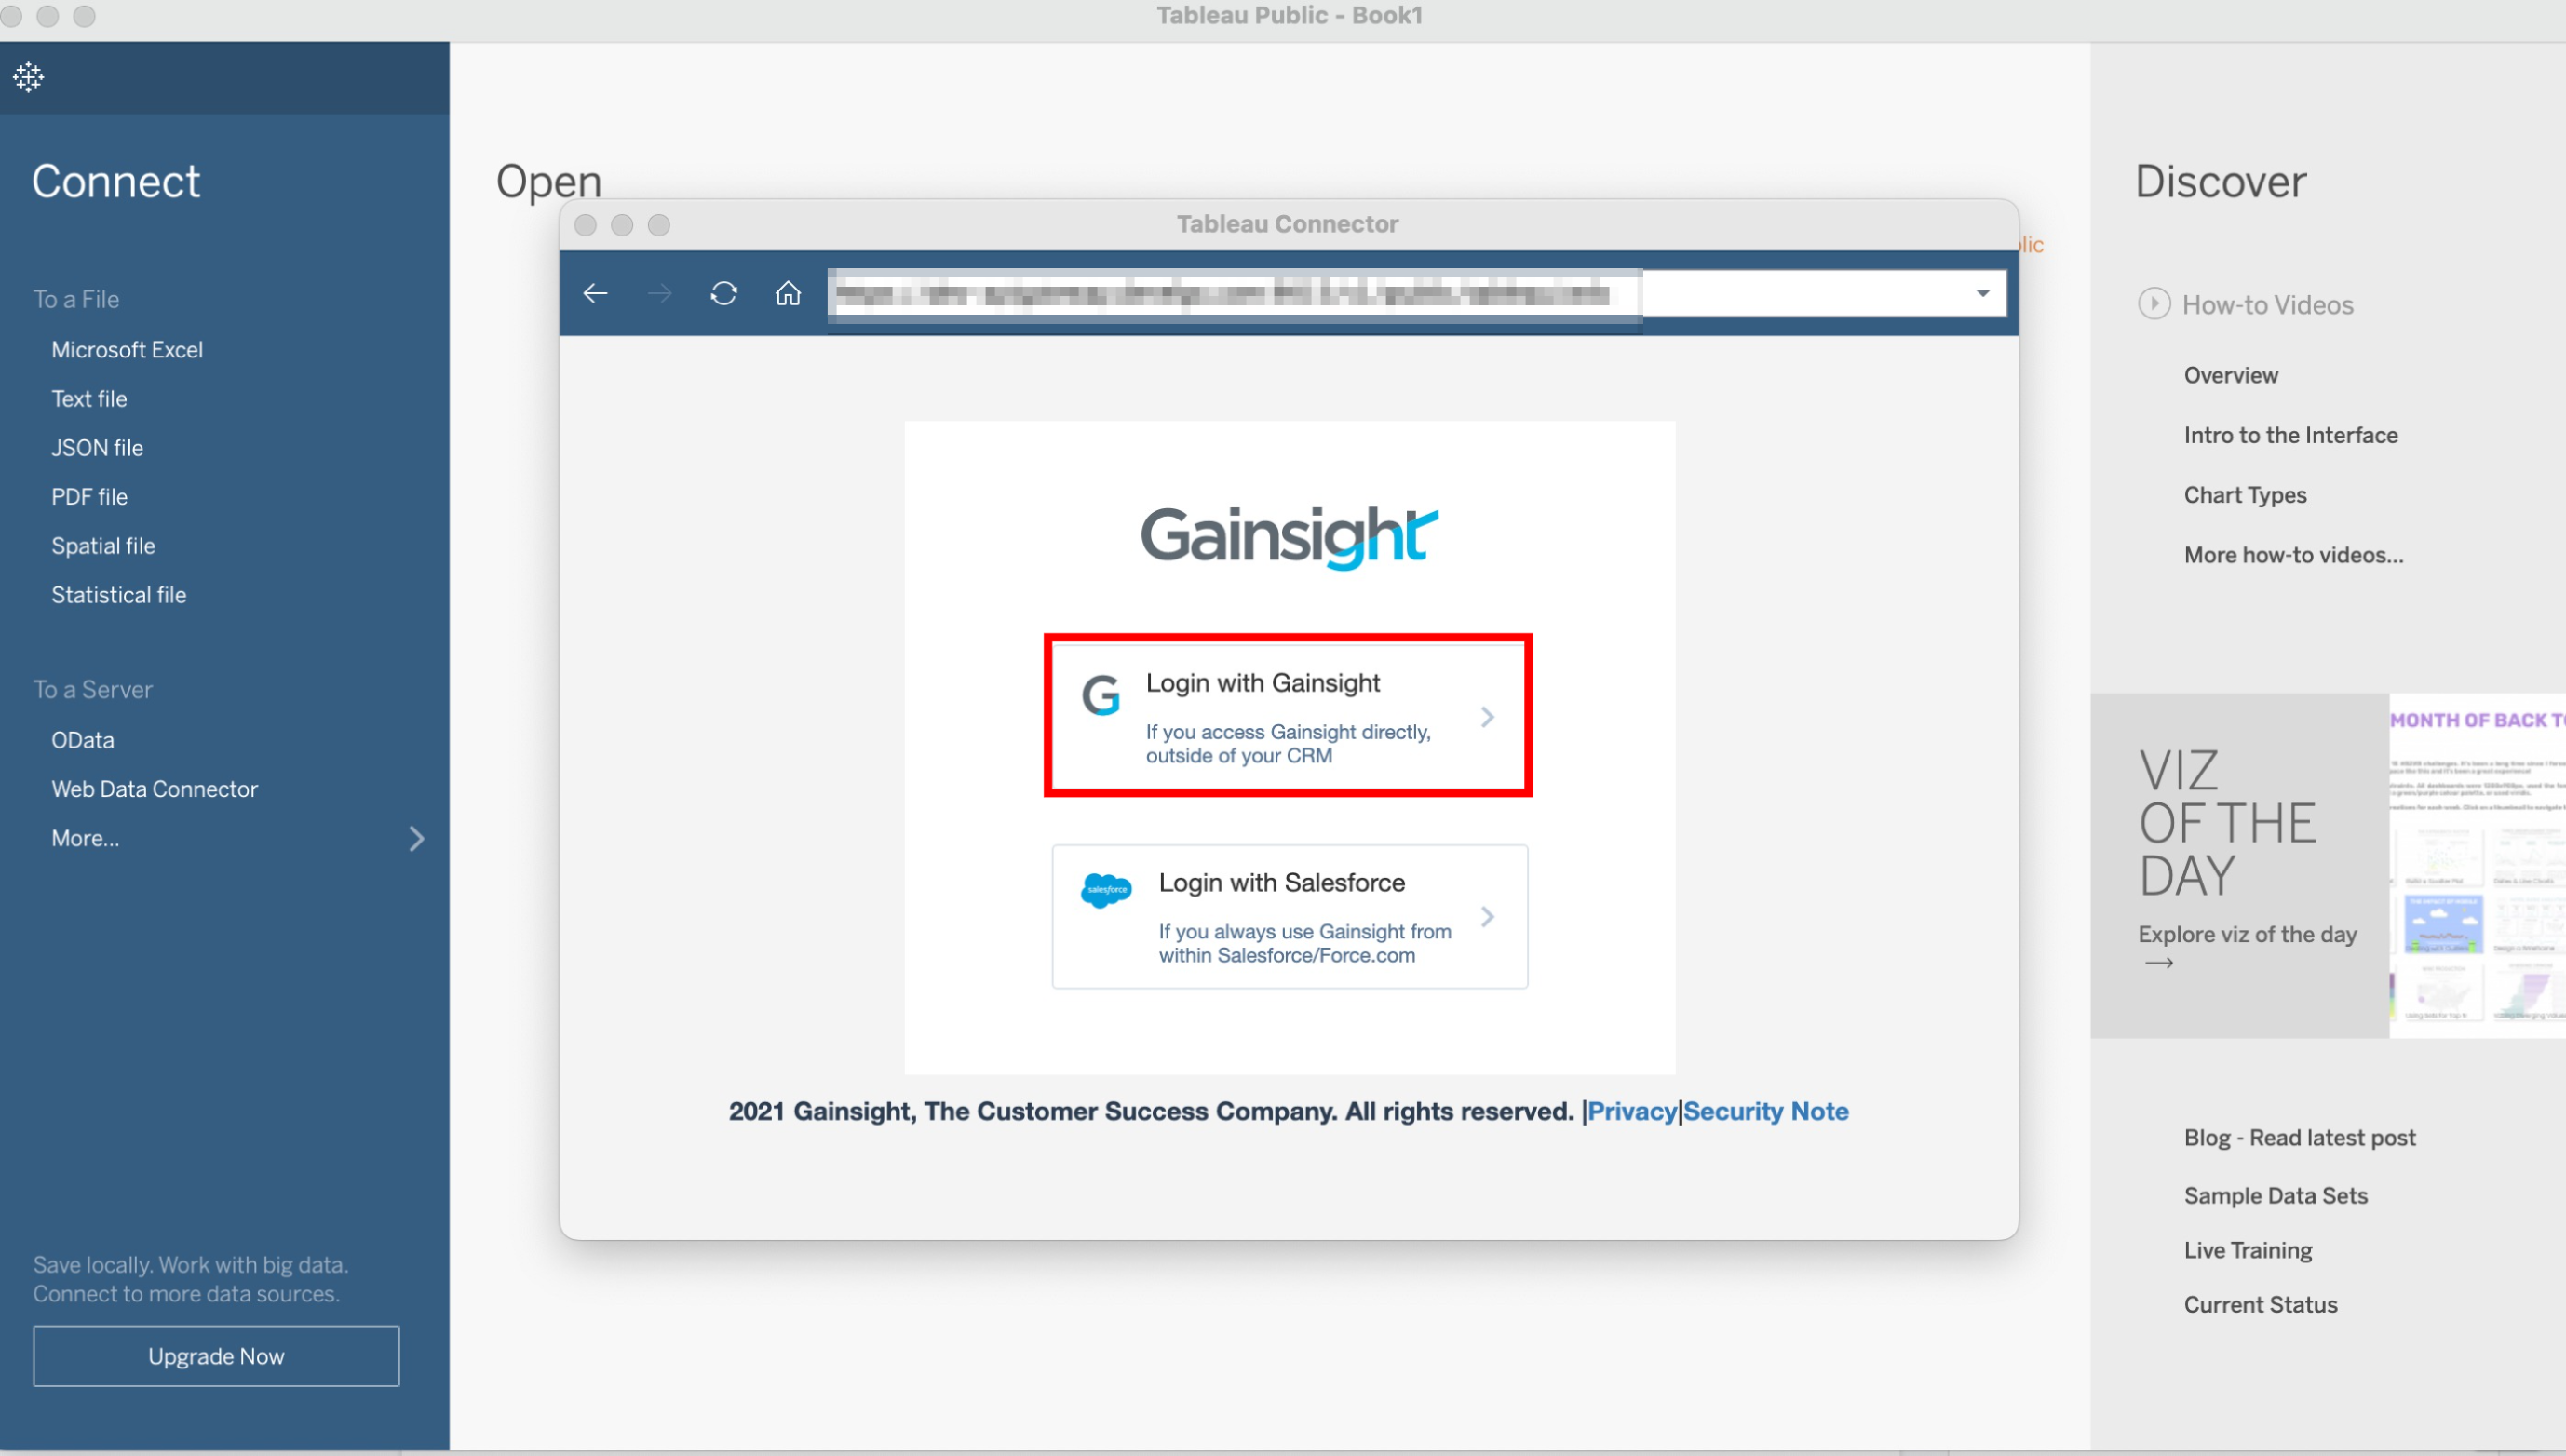 Gainsight Integration with Tableau 1_Login with Gainsight.jpg